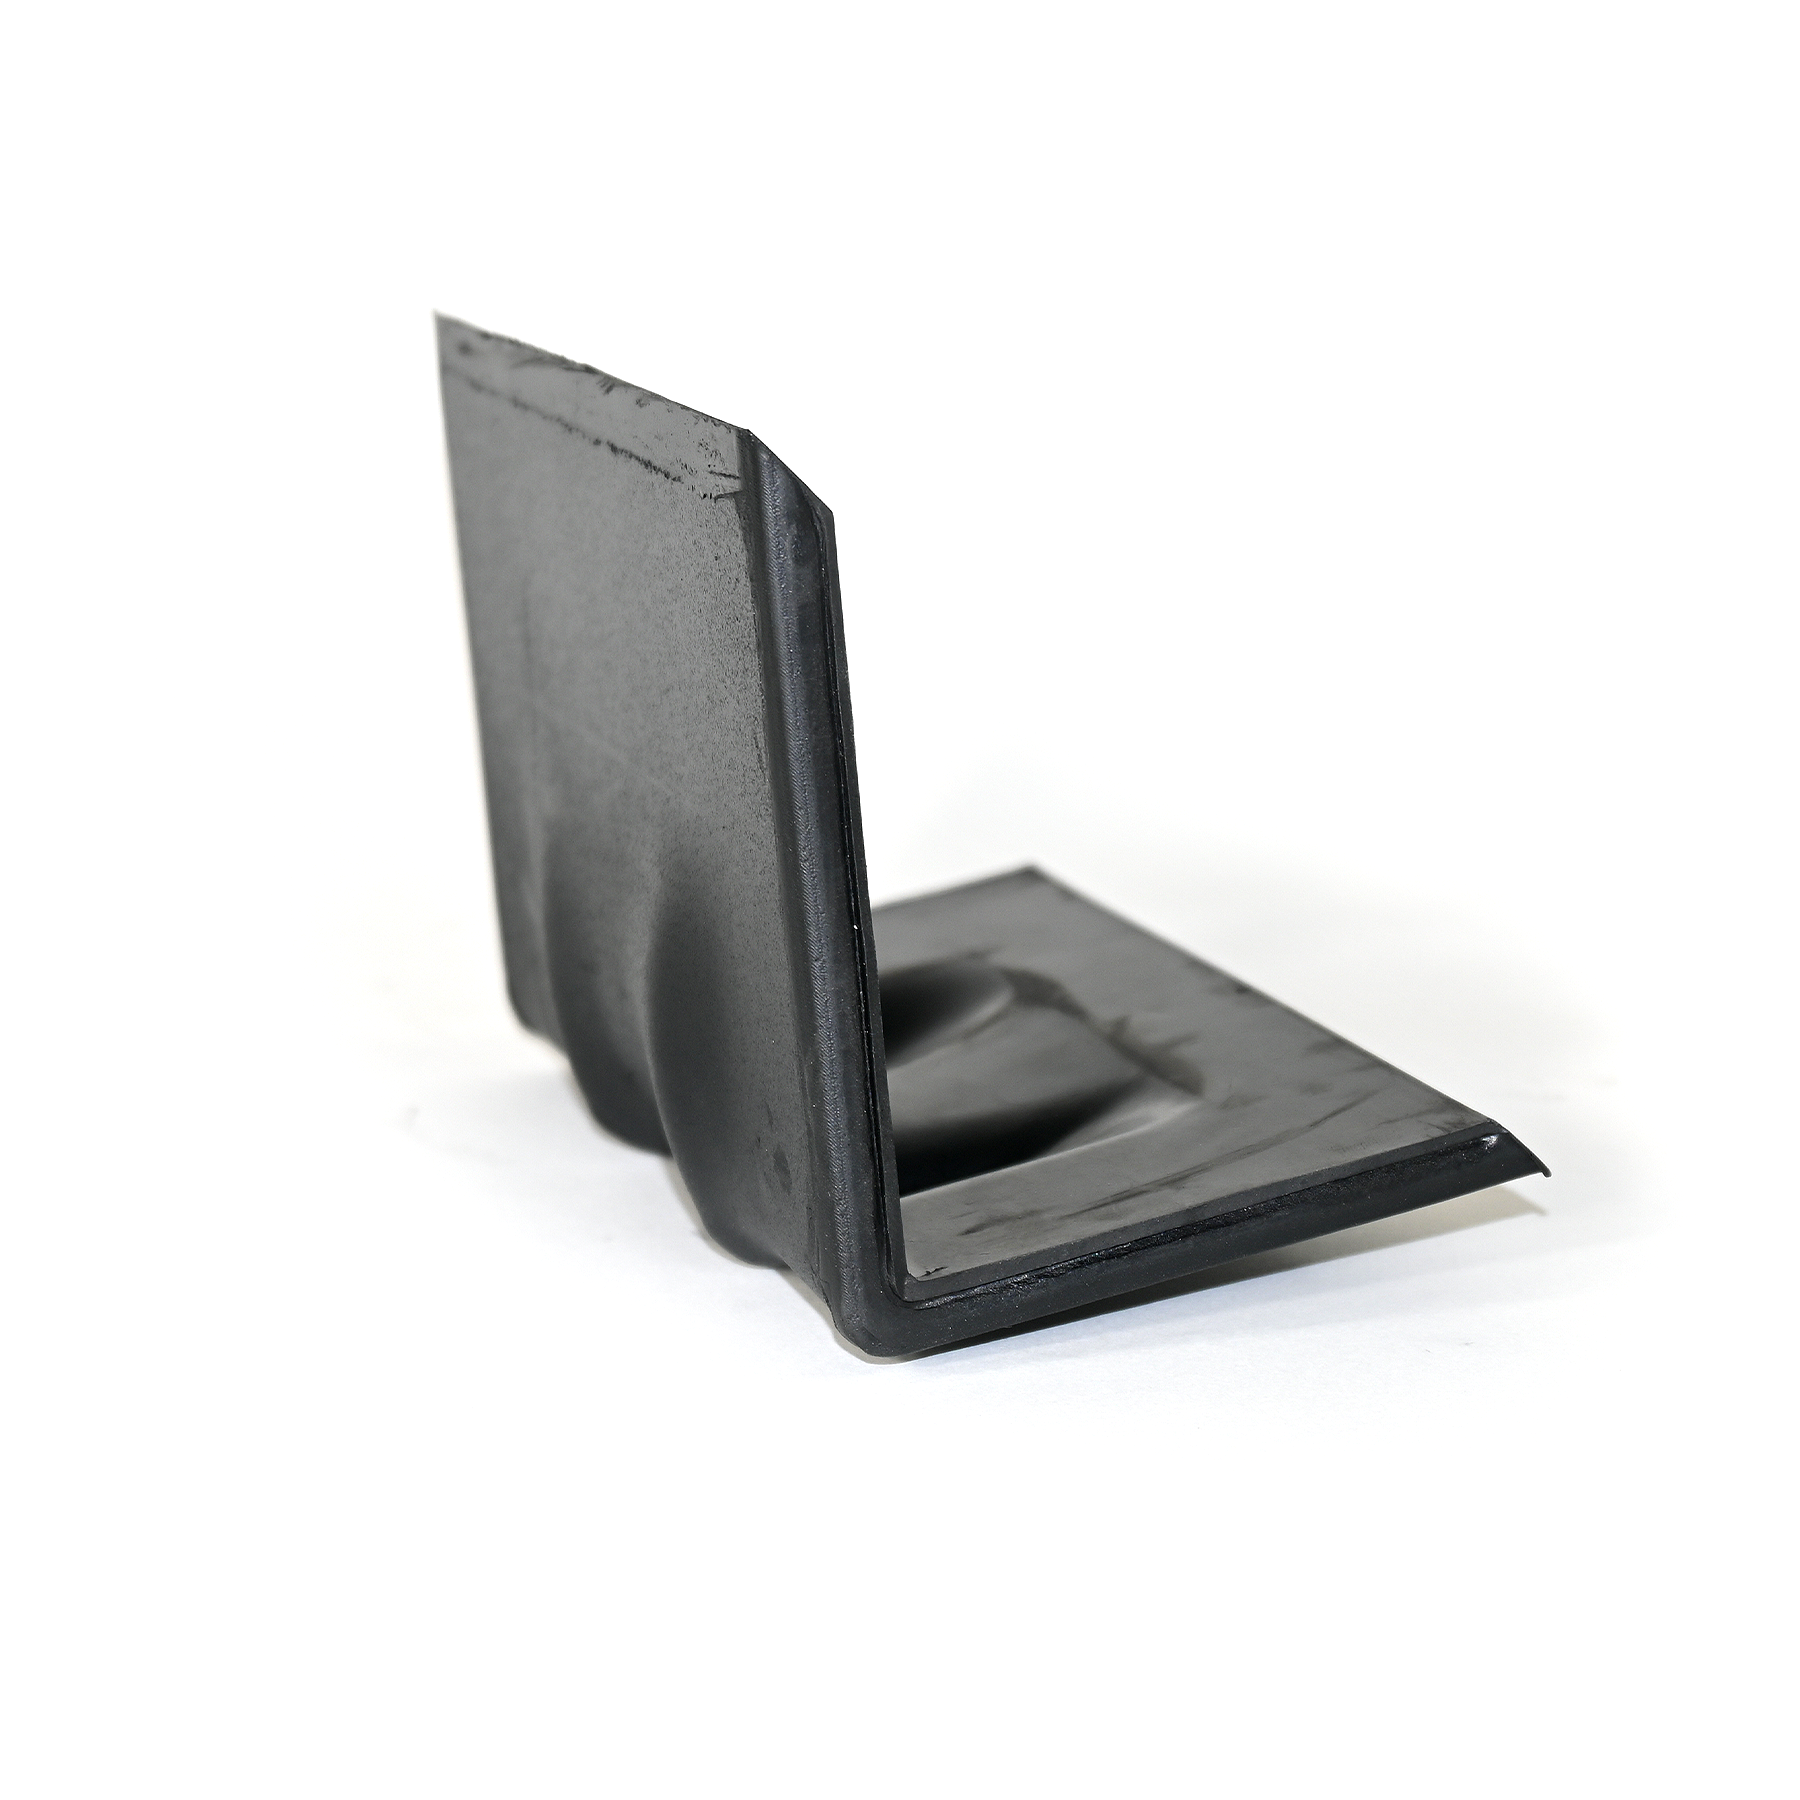 Steel Corner Protector W Rubber Backing 6" x 4”